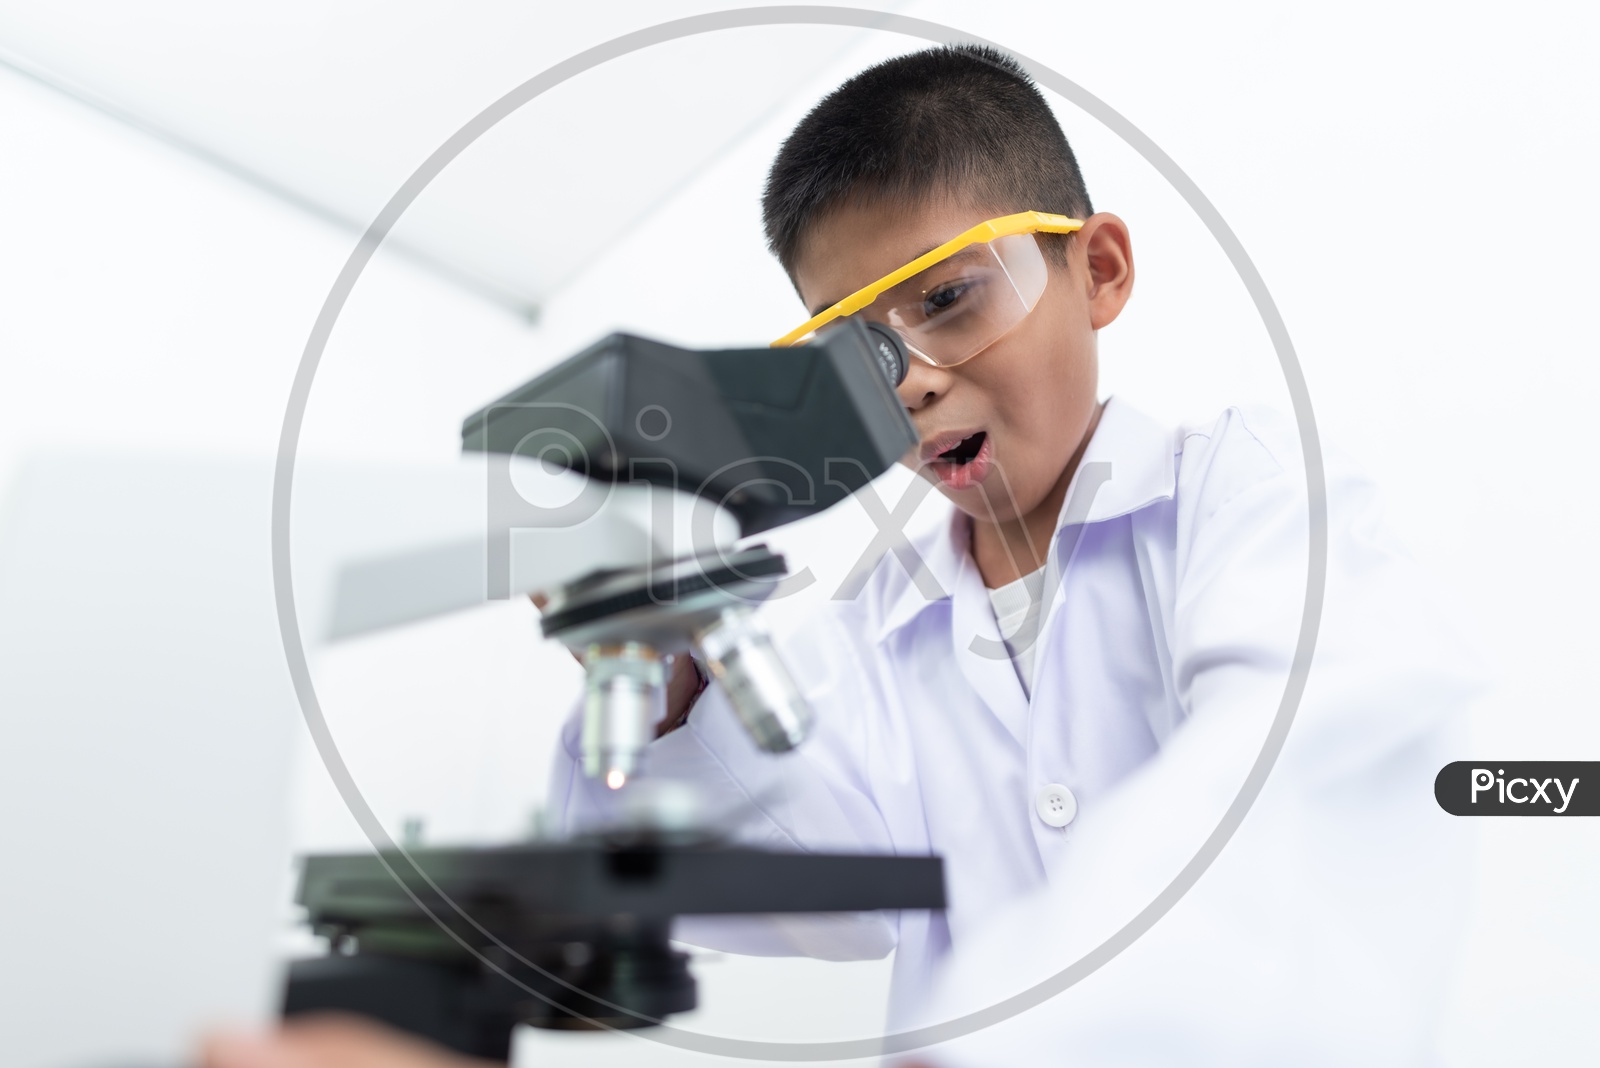 Excited Boy Using Microscope In a Laboratory wearing White Apron